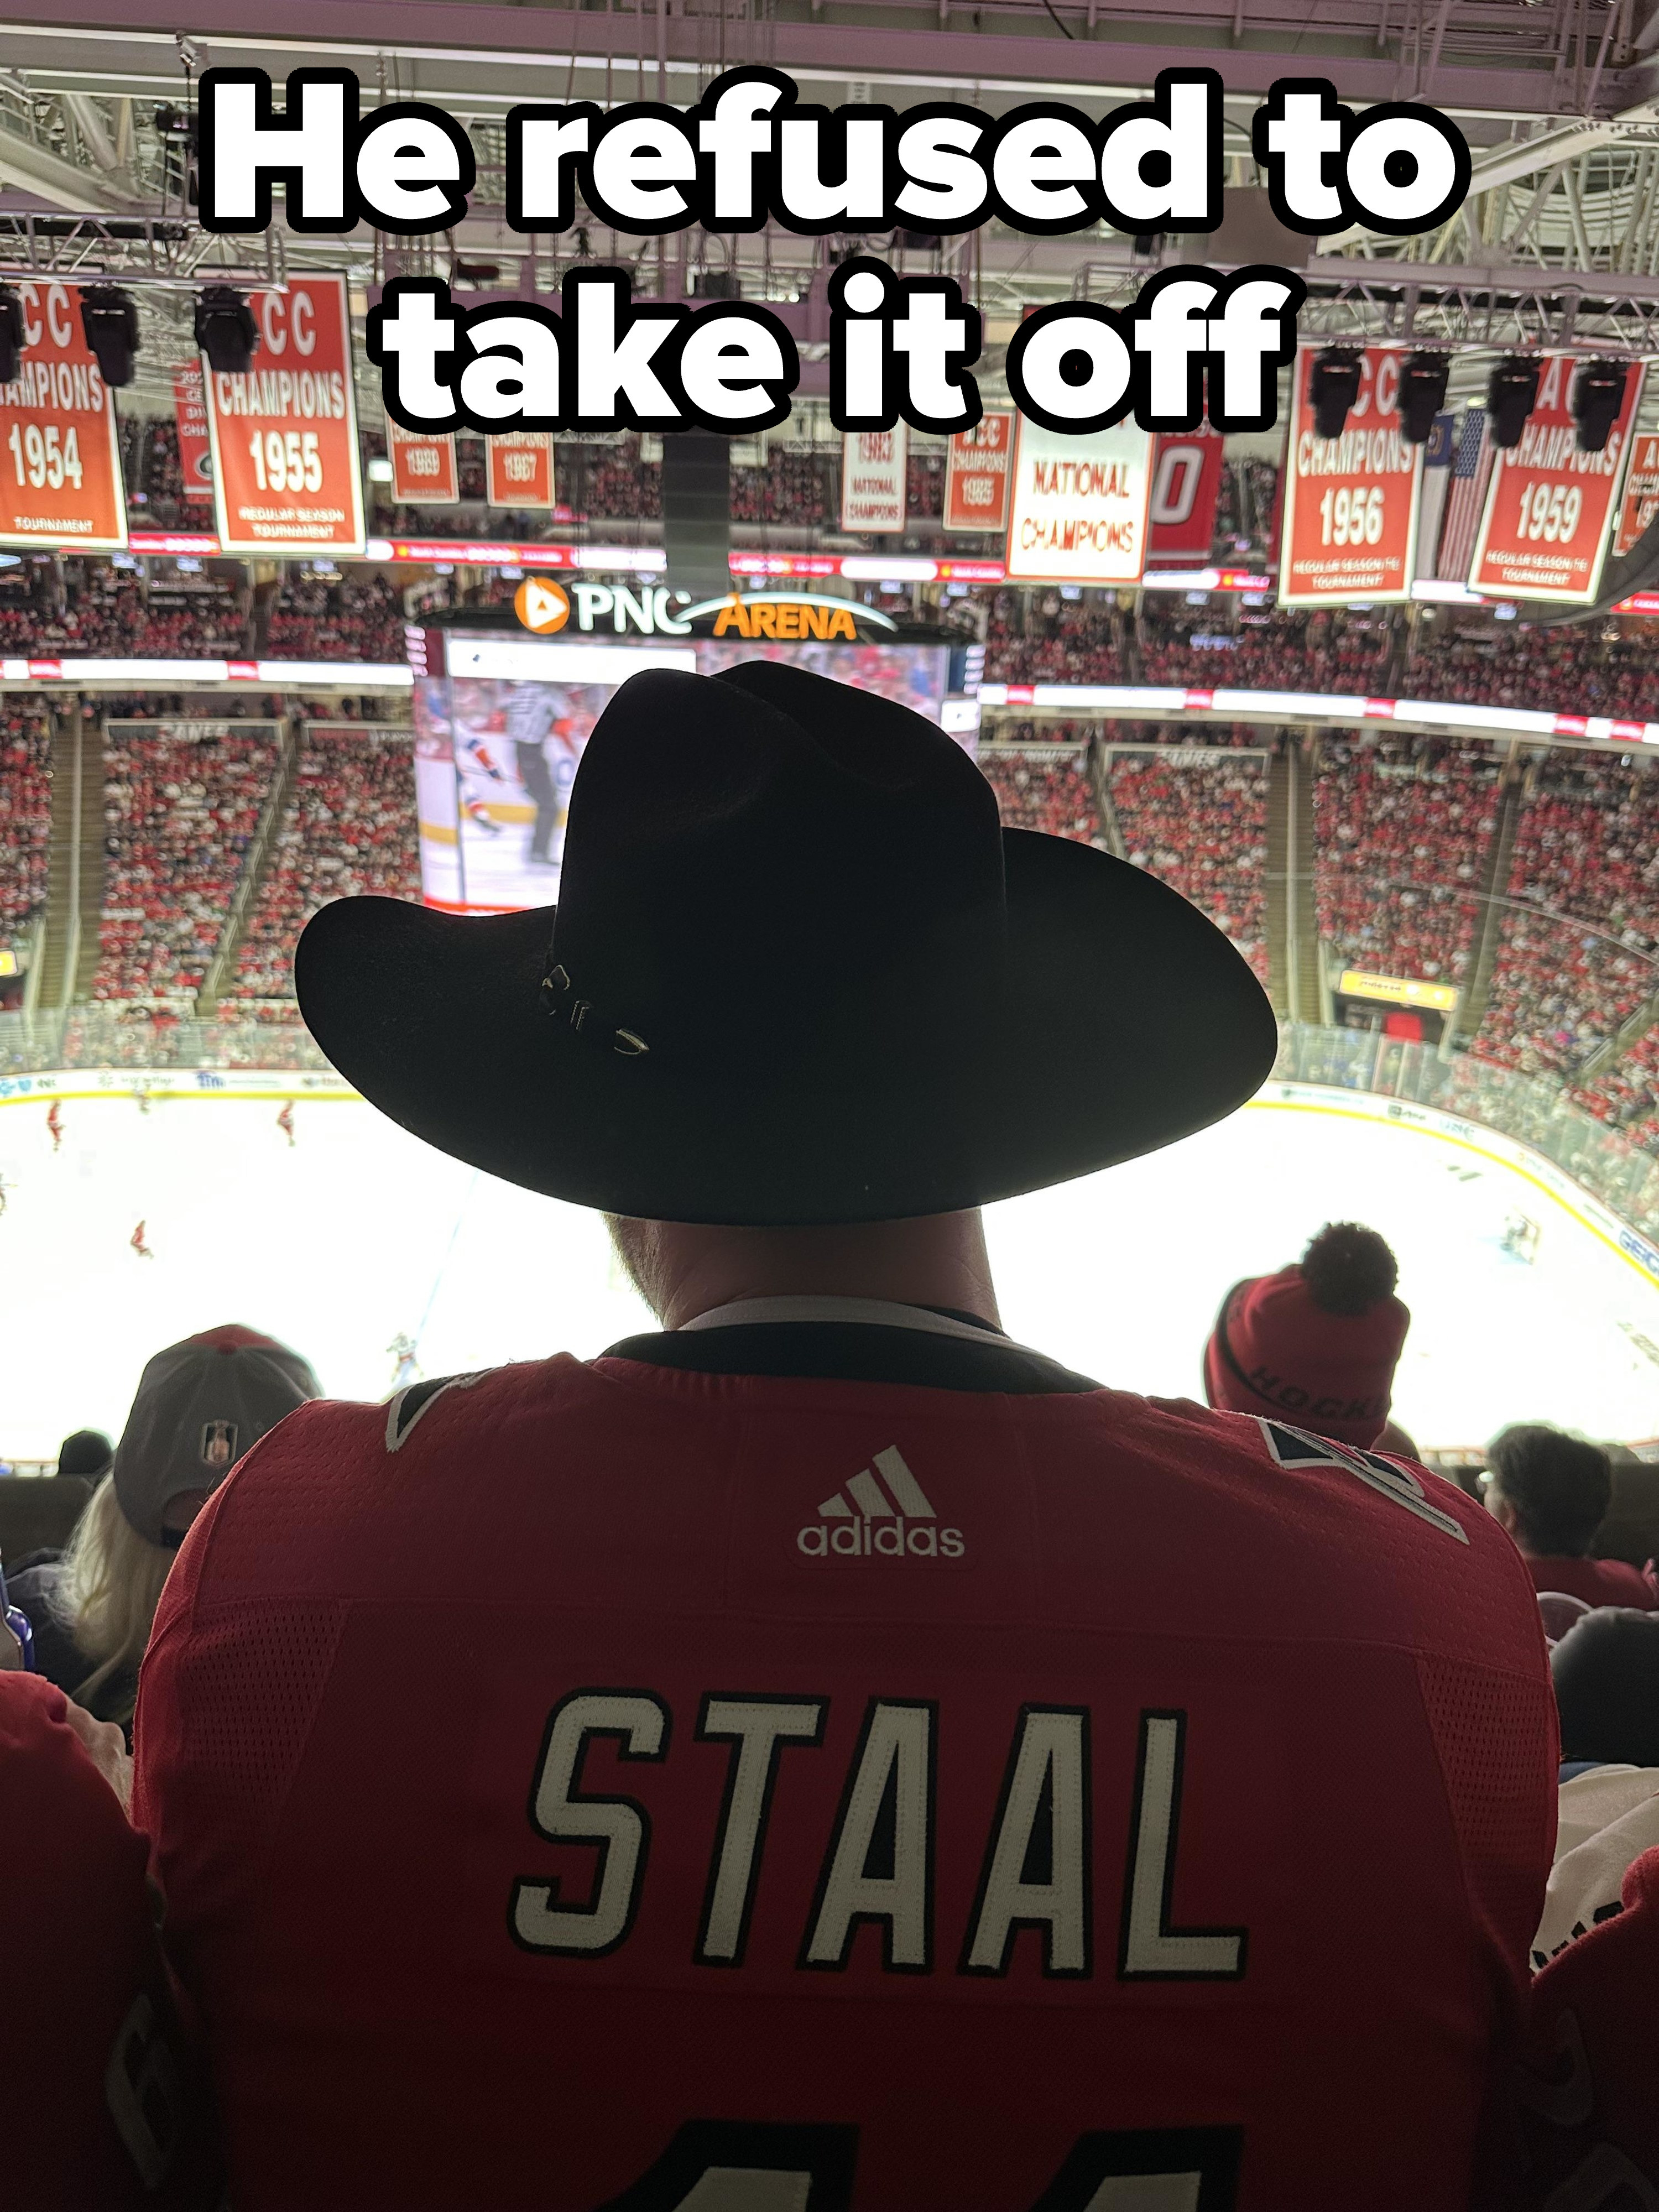 Guy with a cowboy hat at a sports arena blocking a view